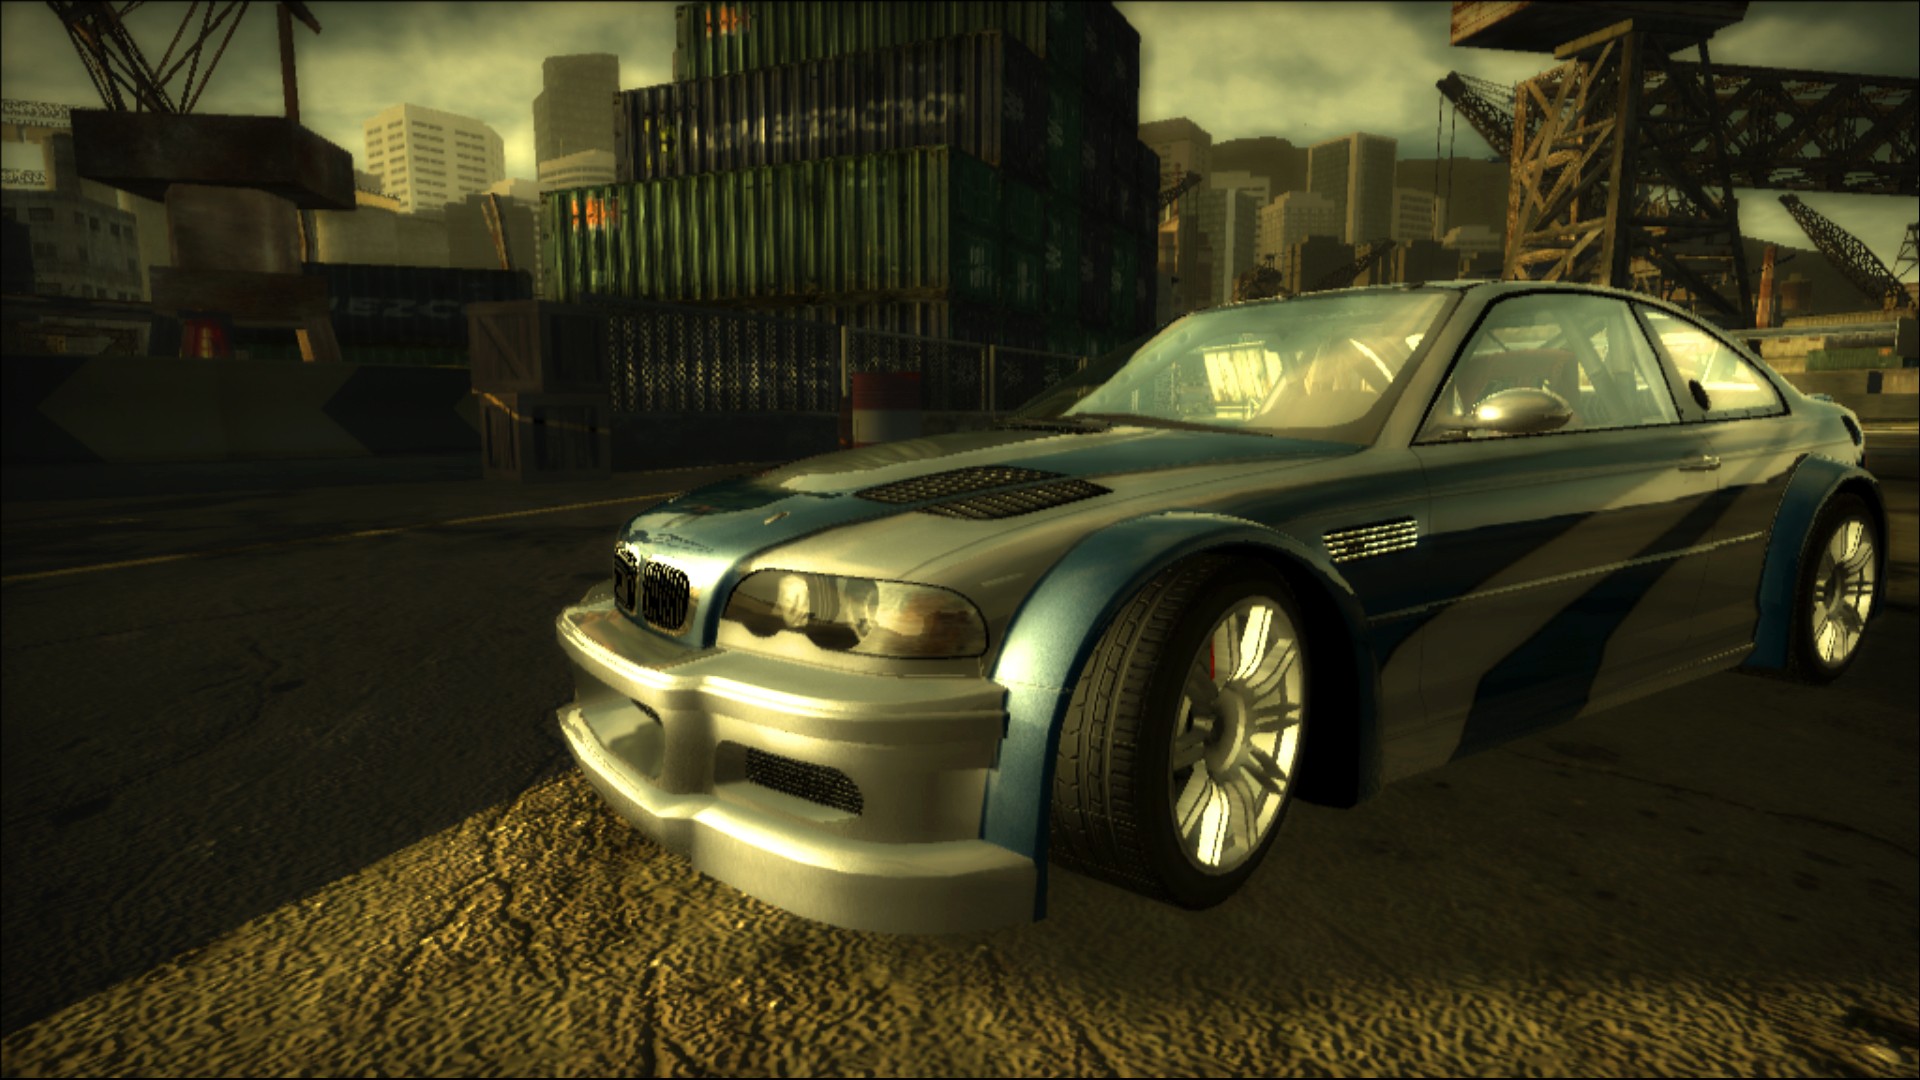 100 most wanted. Need for Speed most wanted 2005. Игра NFS most wanted 2005. NFS most wanted 2005 мост. BMW m3 GTR.